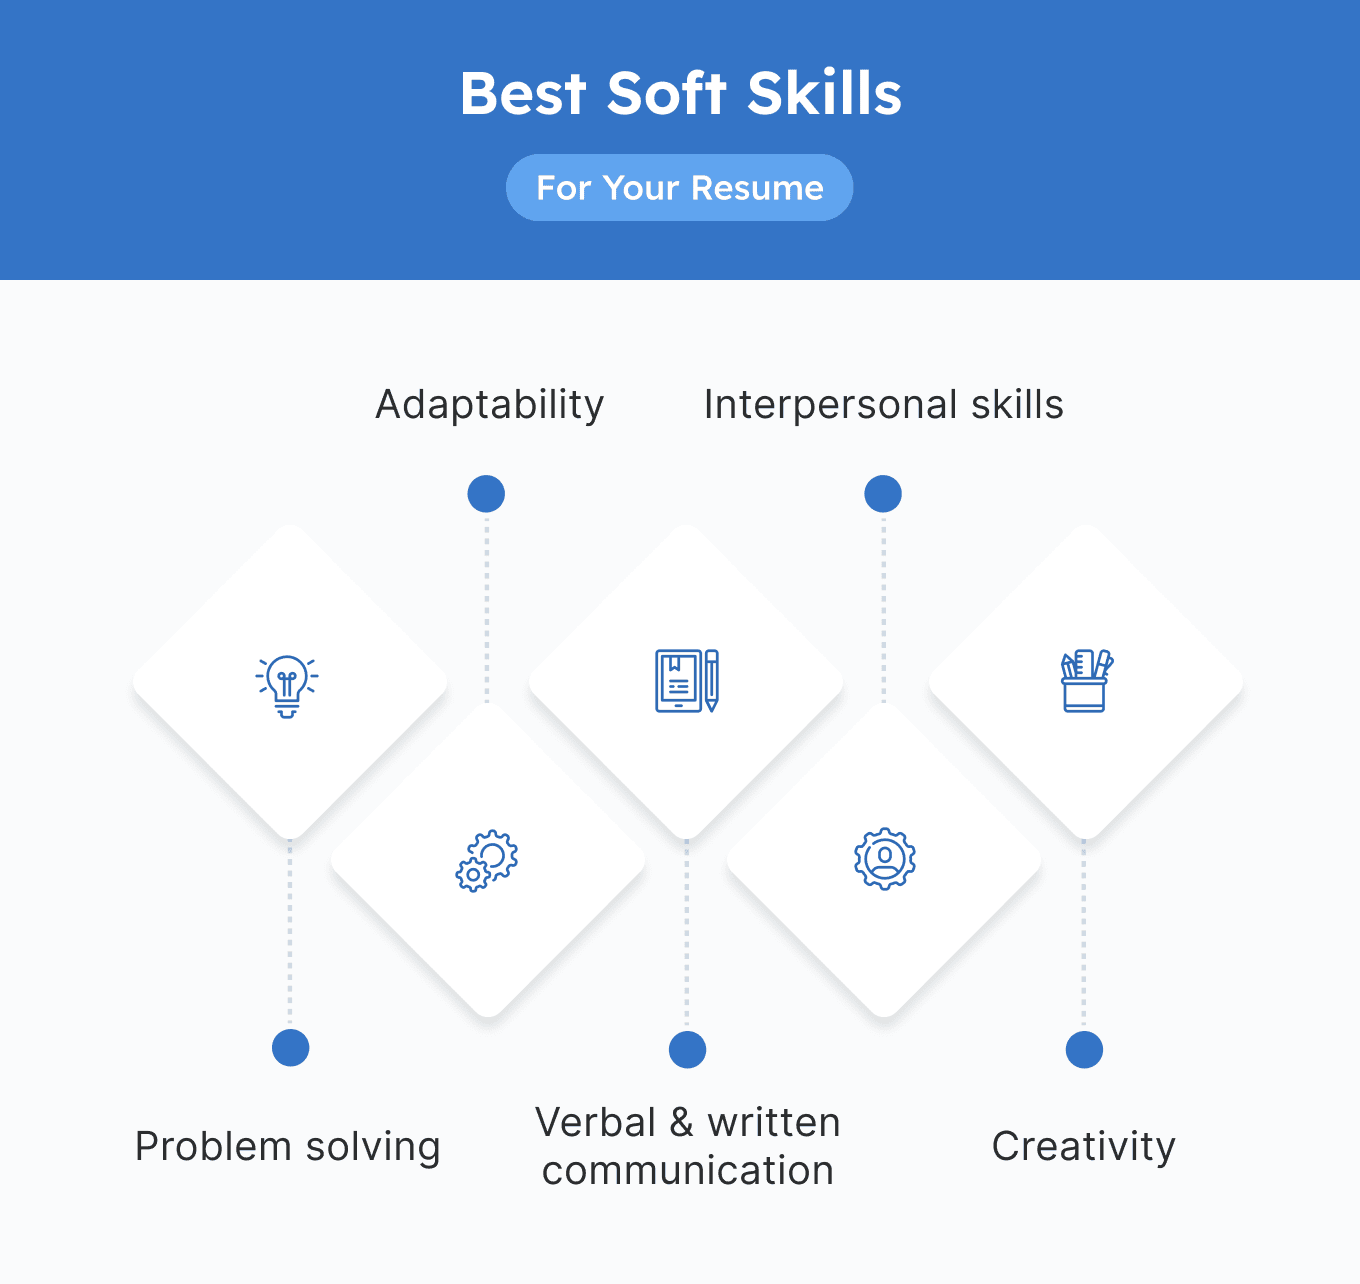 A graphic depicting the top 5 soft skills to include on your resume.